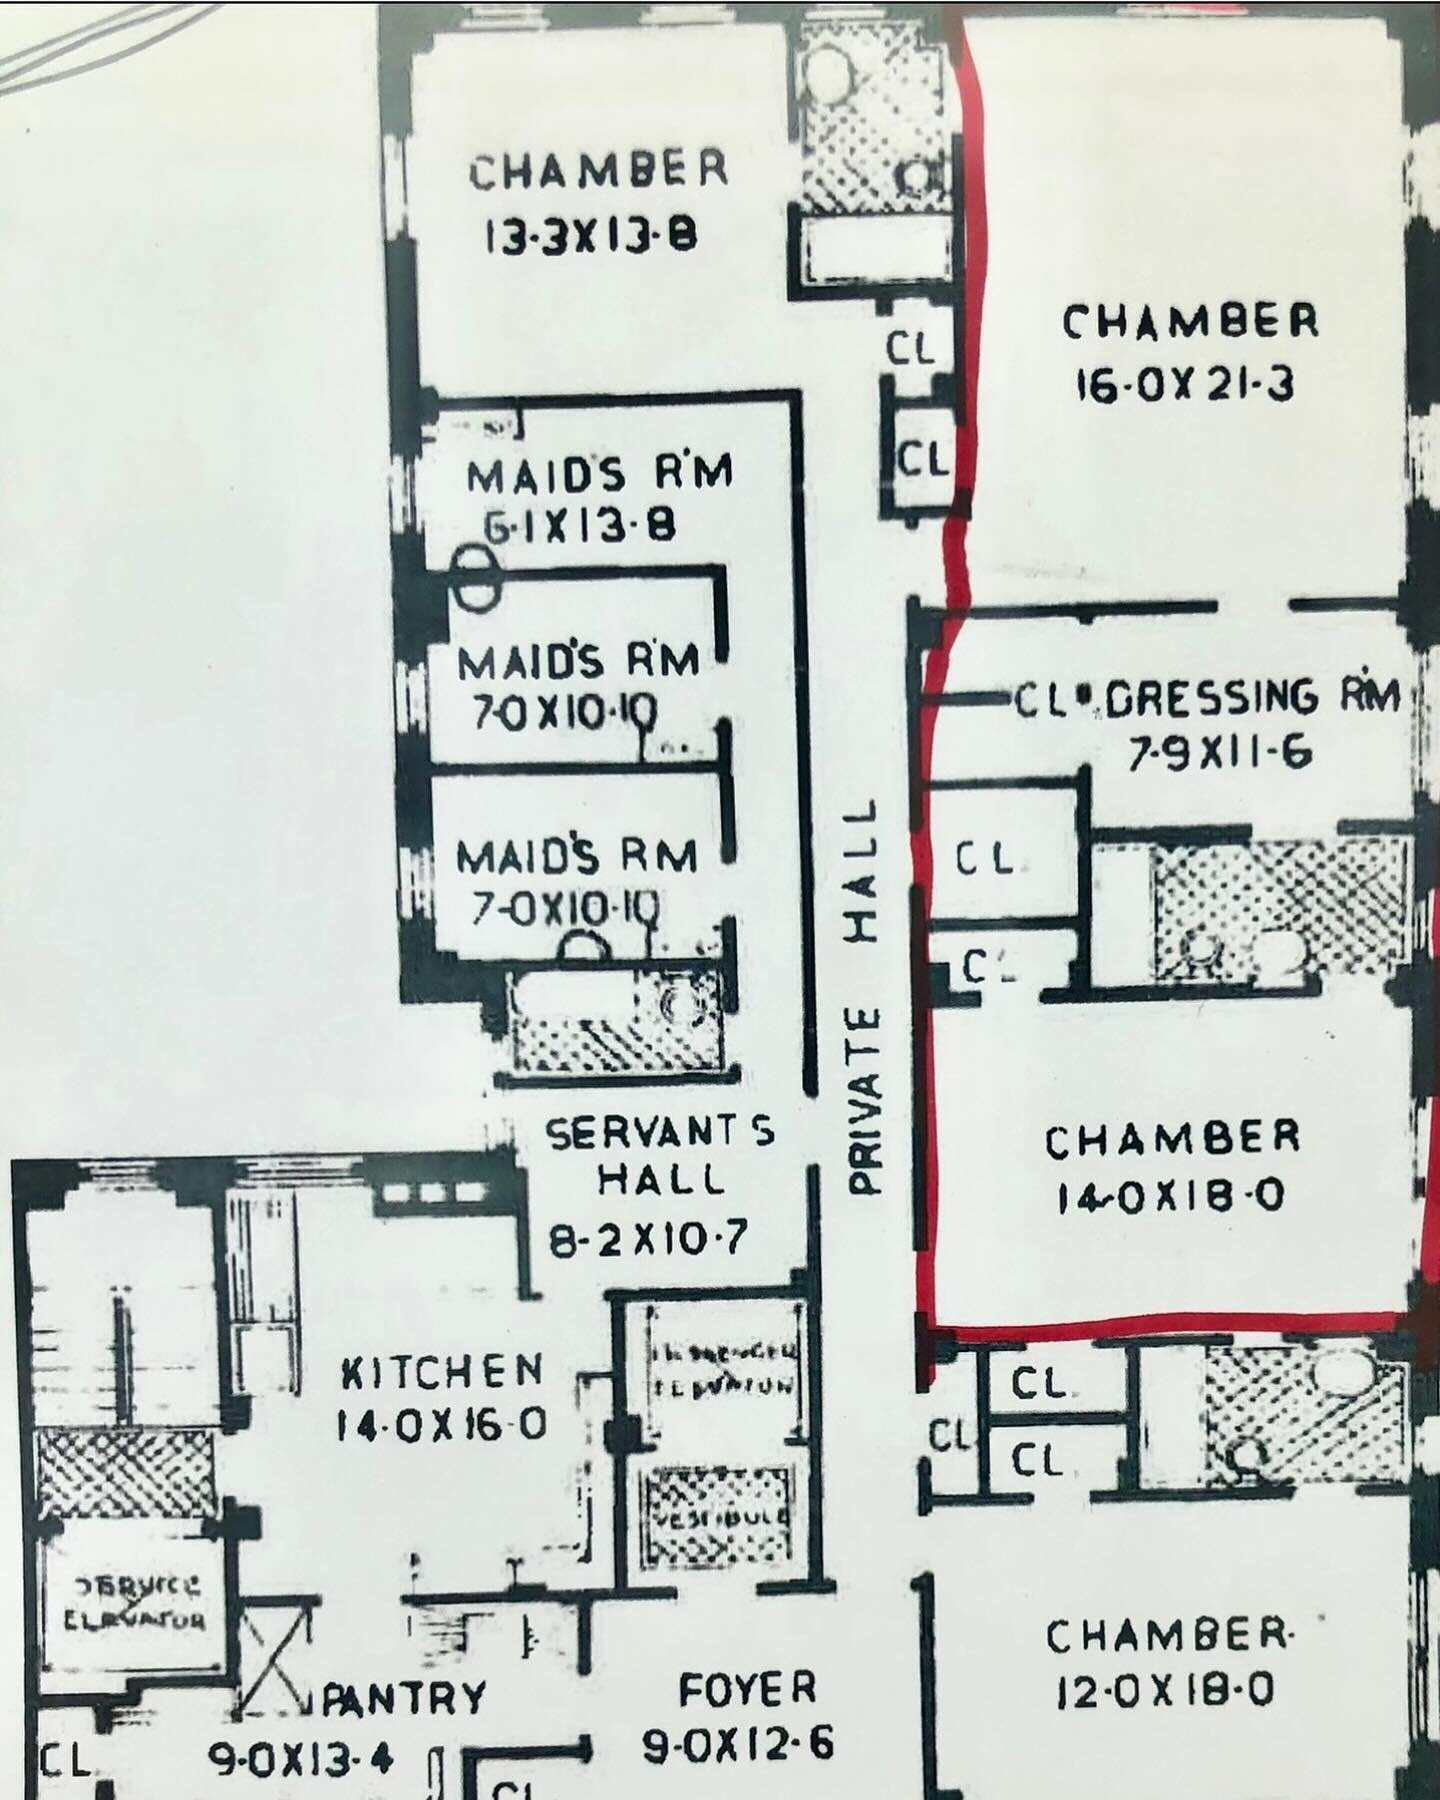 Red Jacket Gilded Age.
I love that we located the original floorplan from 1916 for my listing at 470 Park Avenue. After more than a century, it is Red Jacket Ready for a new owner and a new vision for the next 100 years.

www.redjacketresidential.com